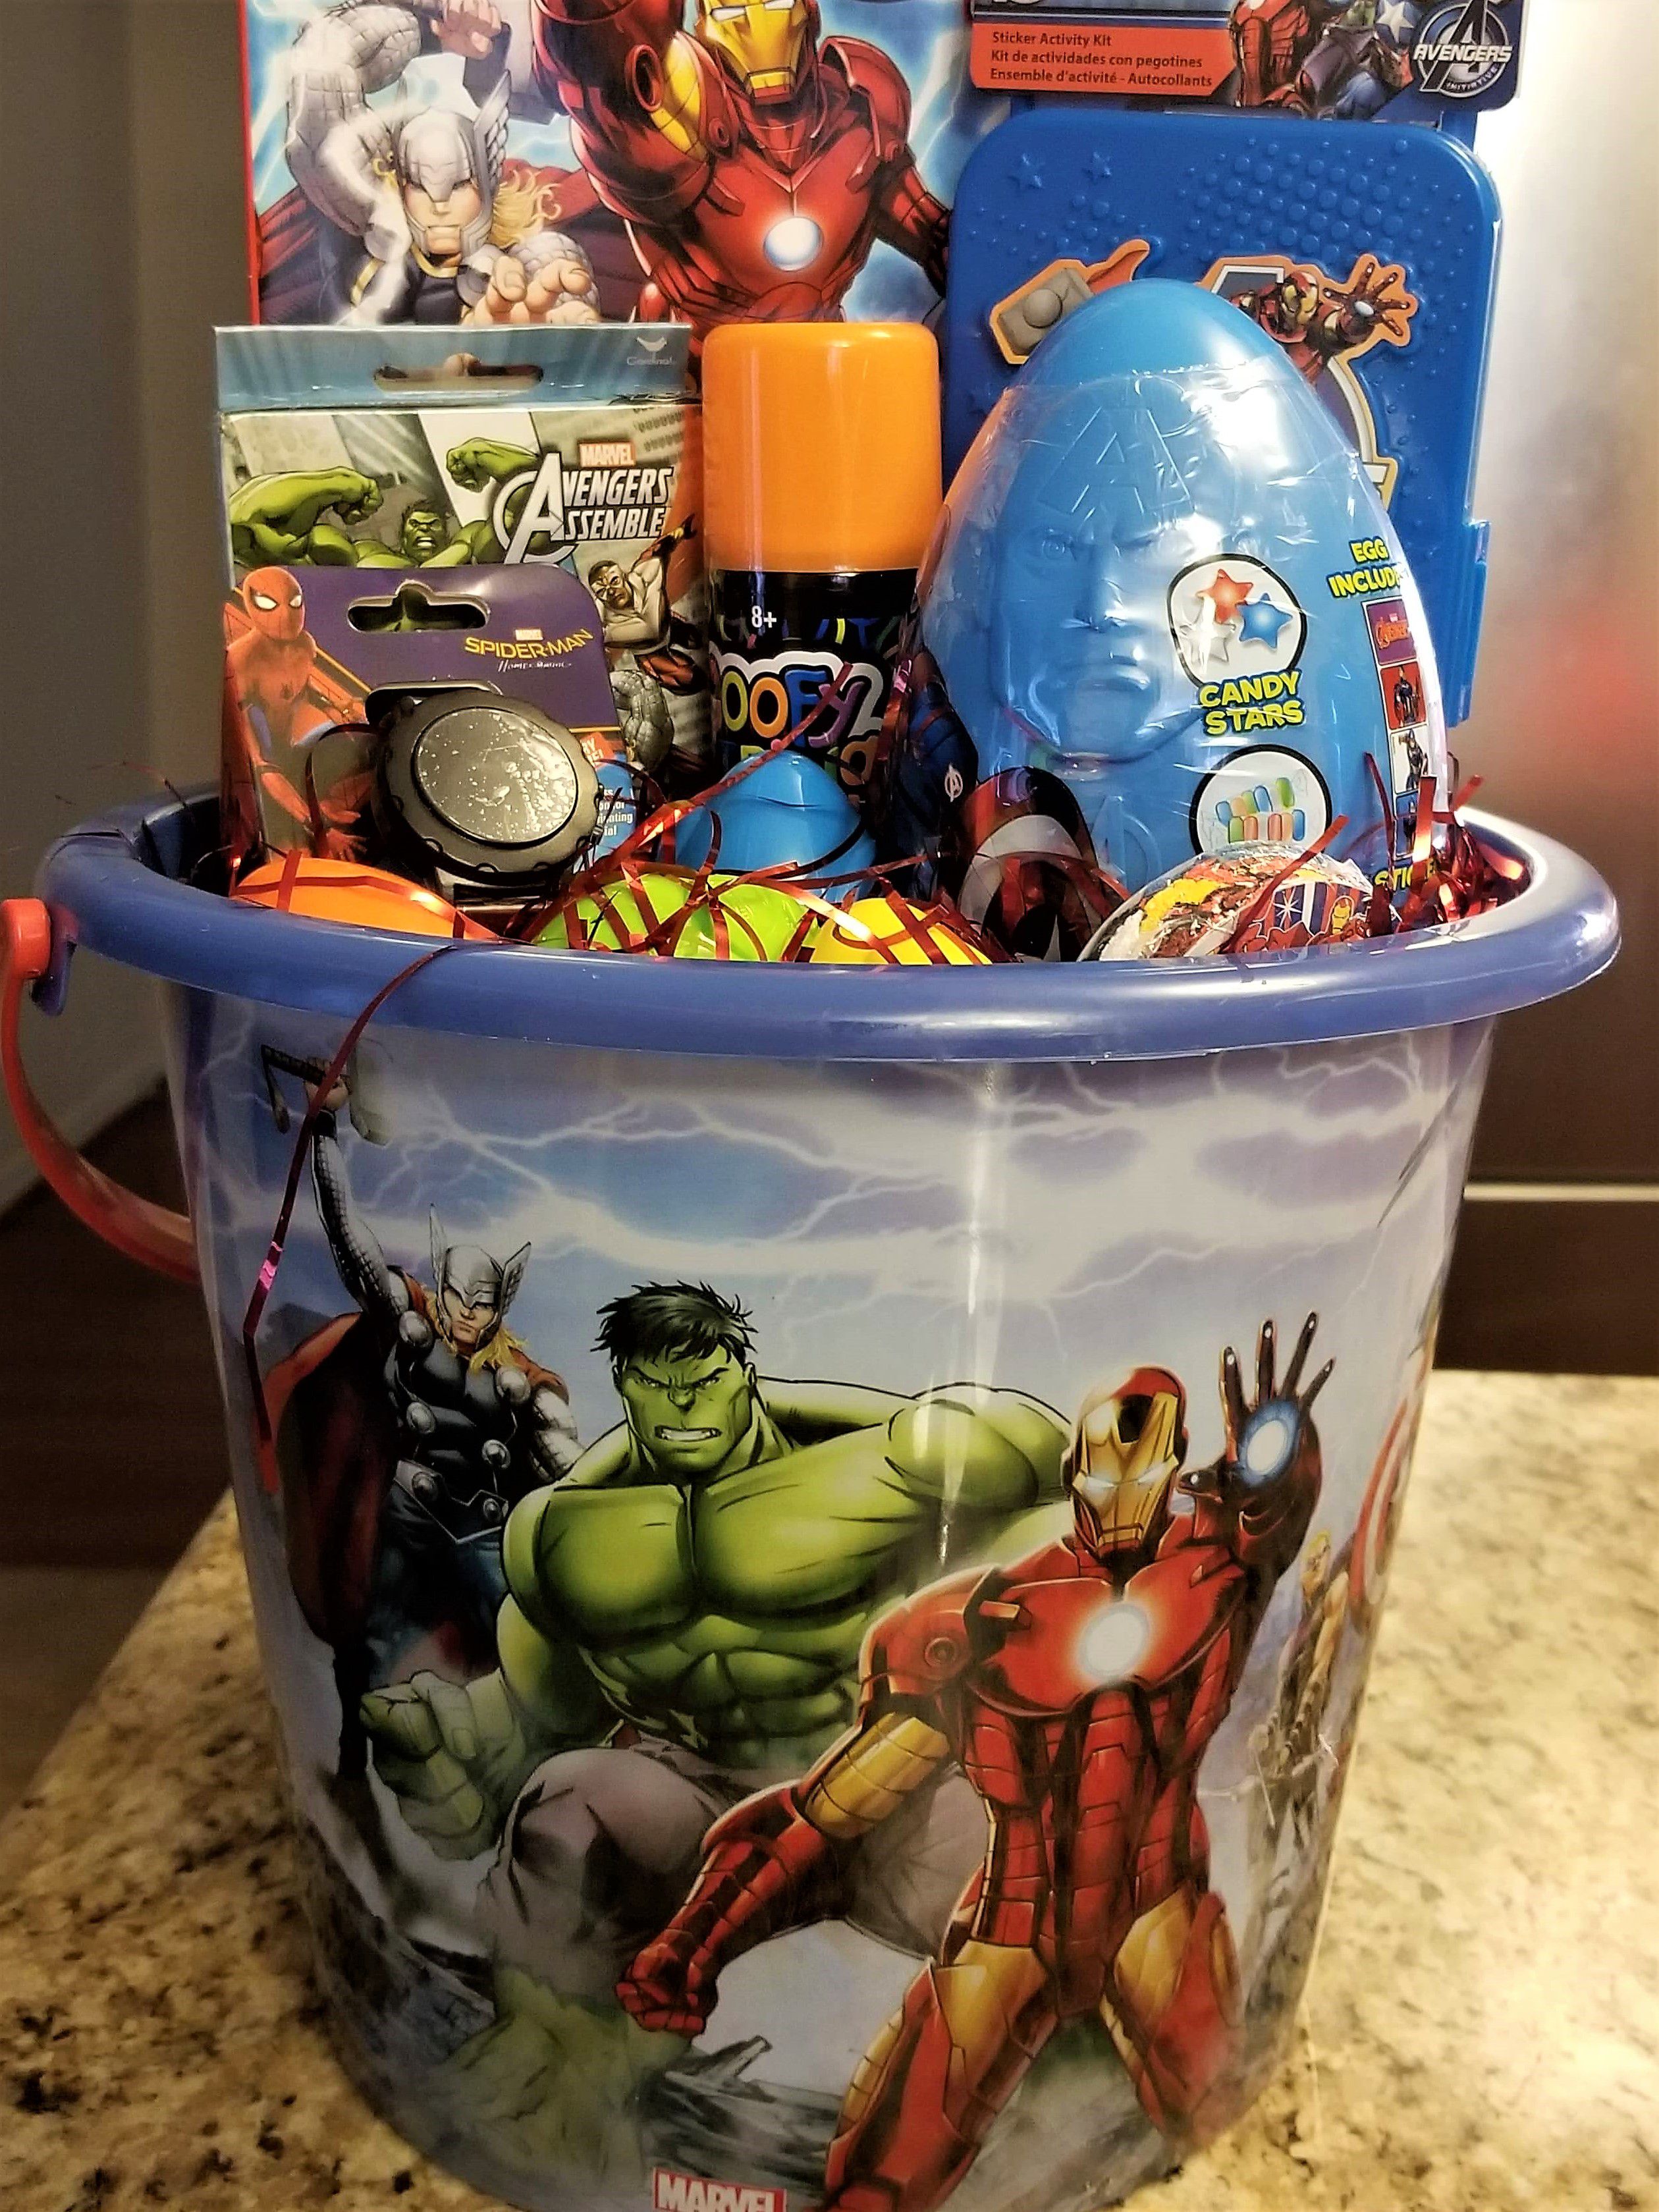 Marvels Avengers Easter Basket for Boys - This is a great super hero basket!